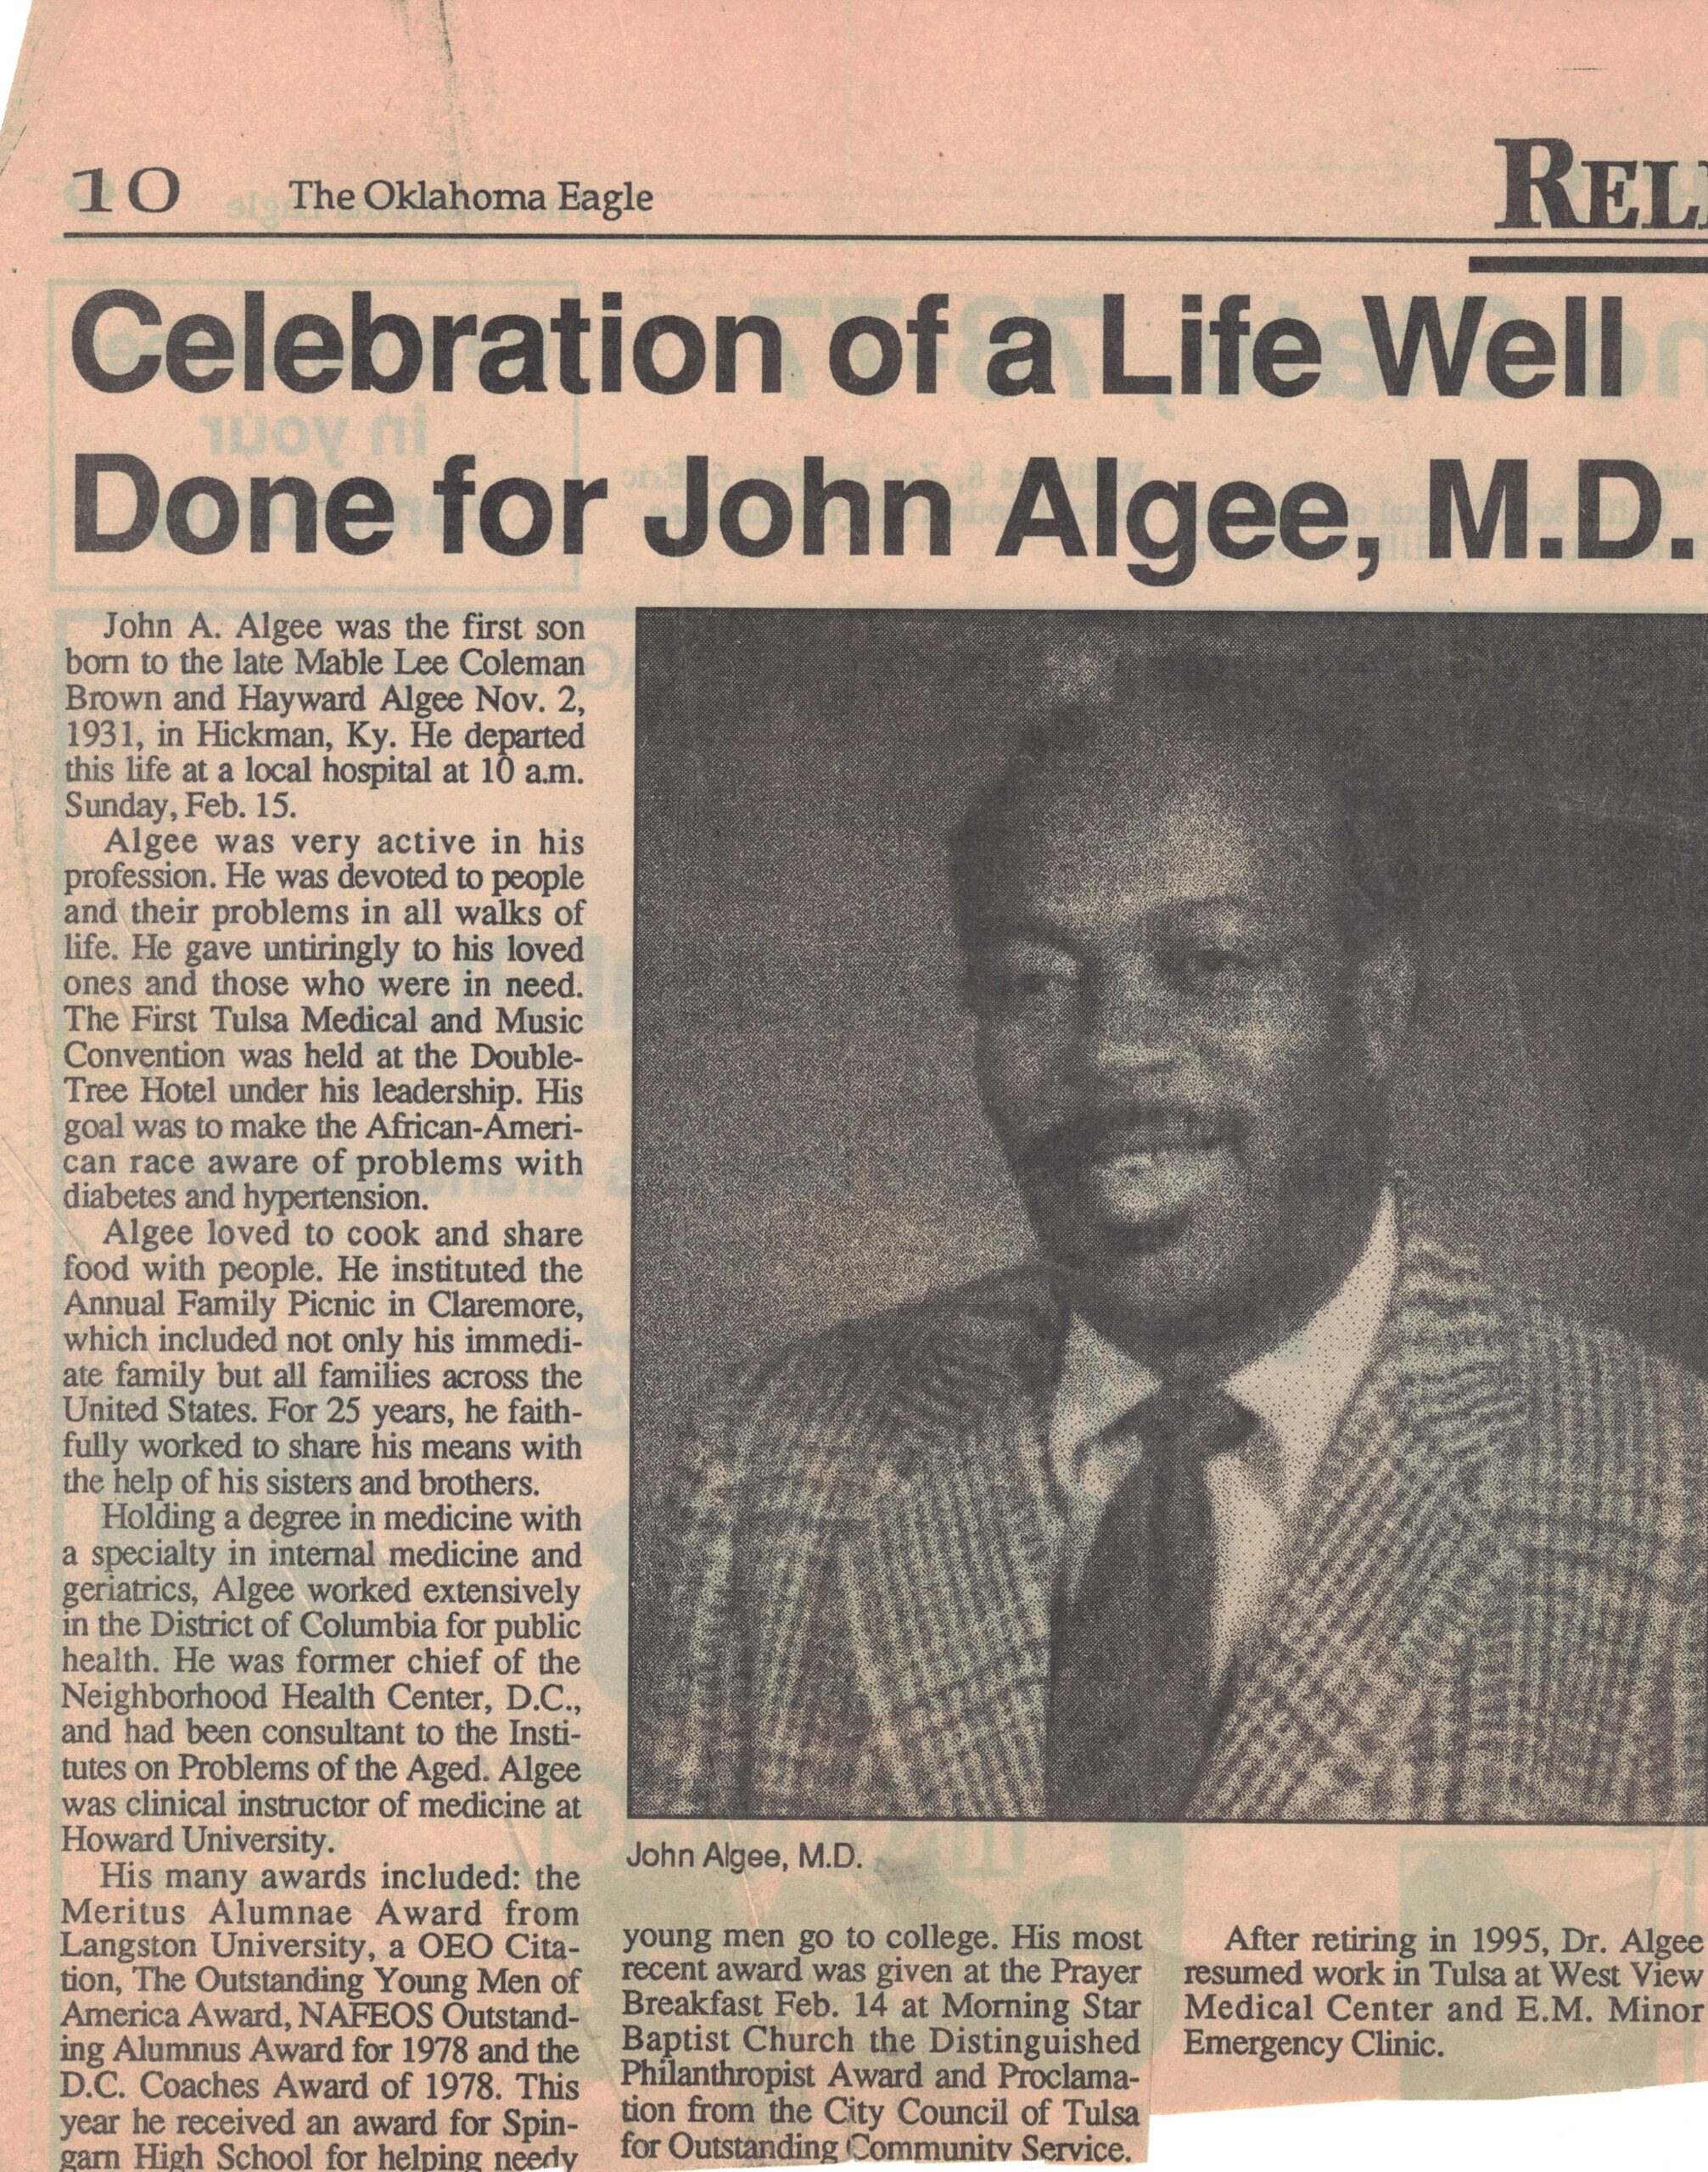 Obituary for Dr. John Algee with picture